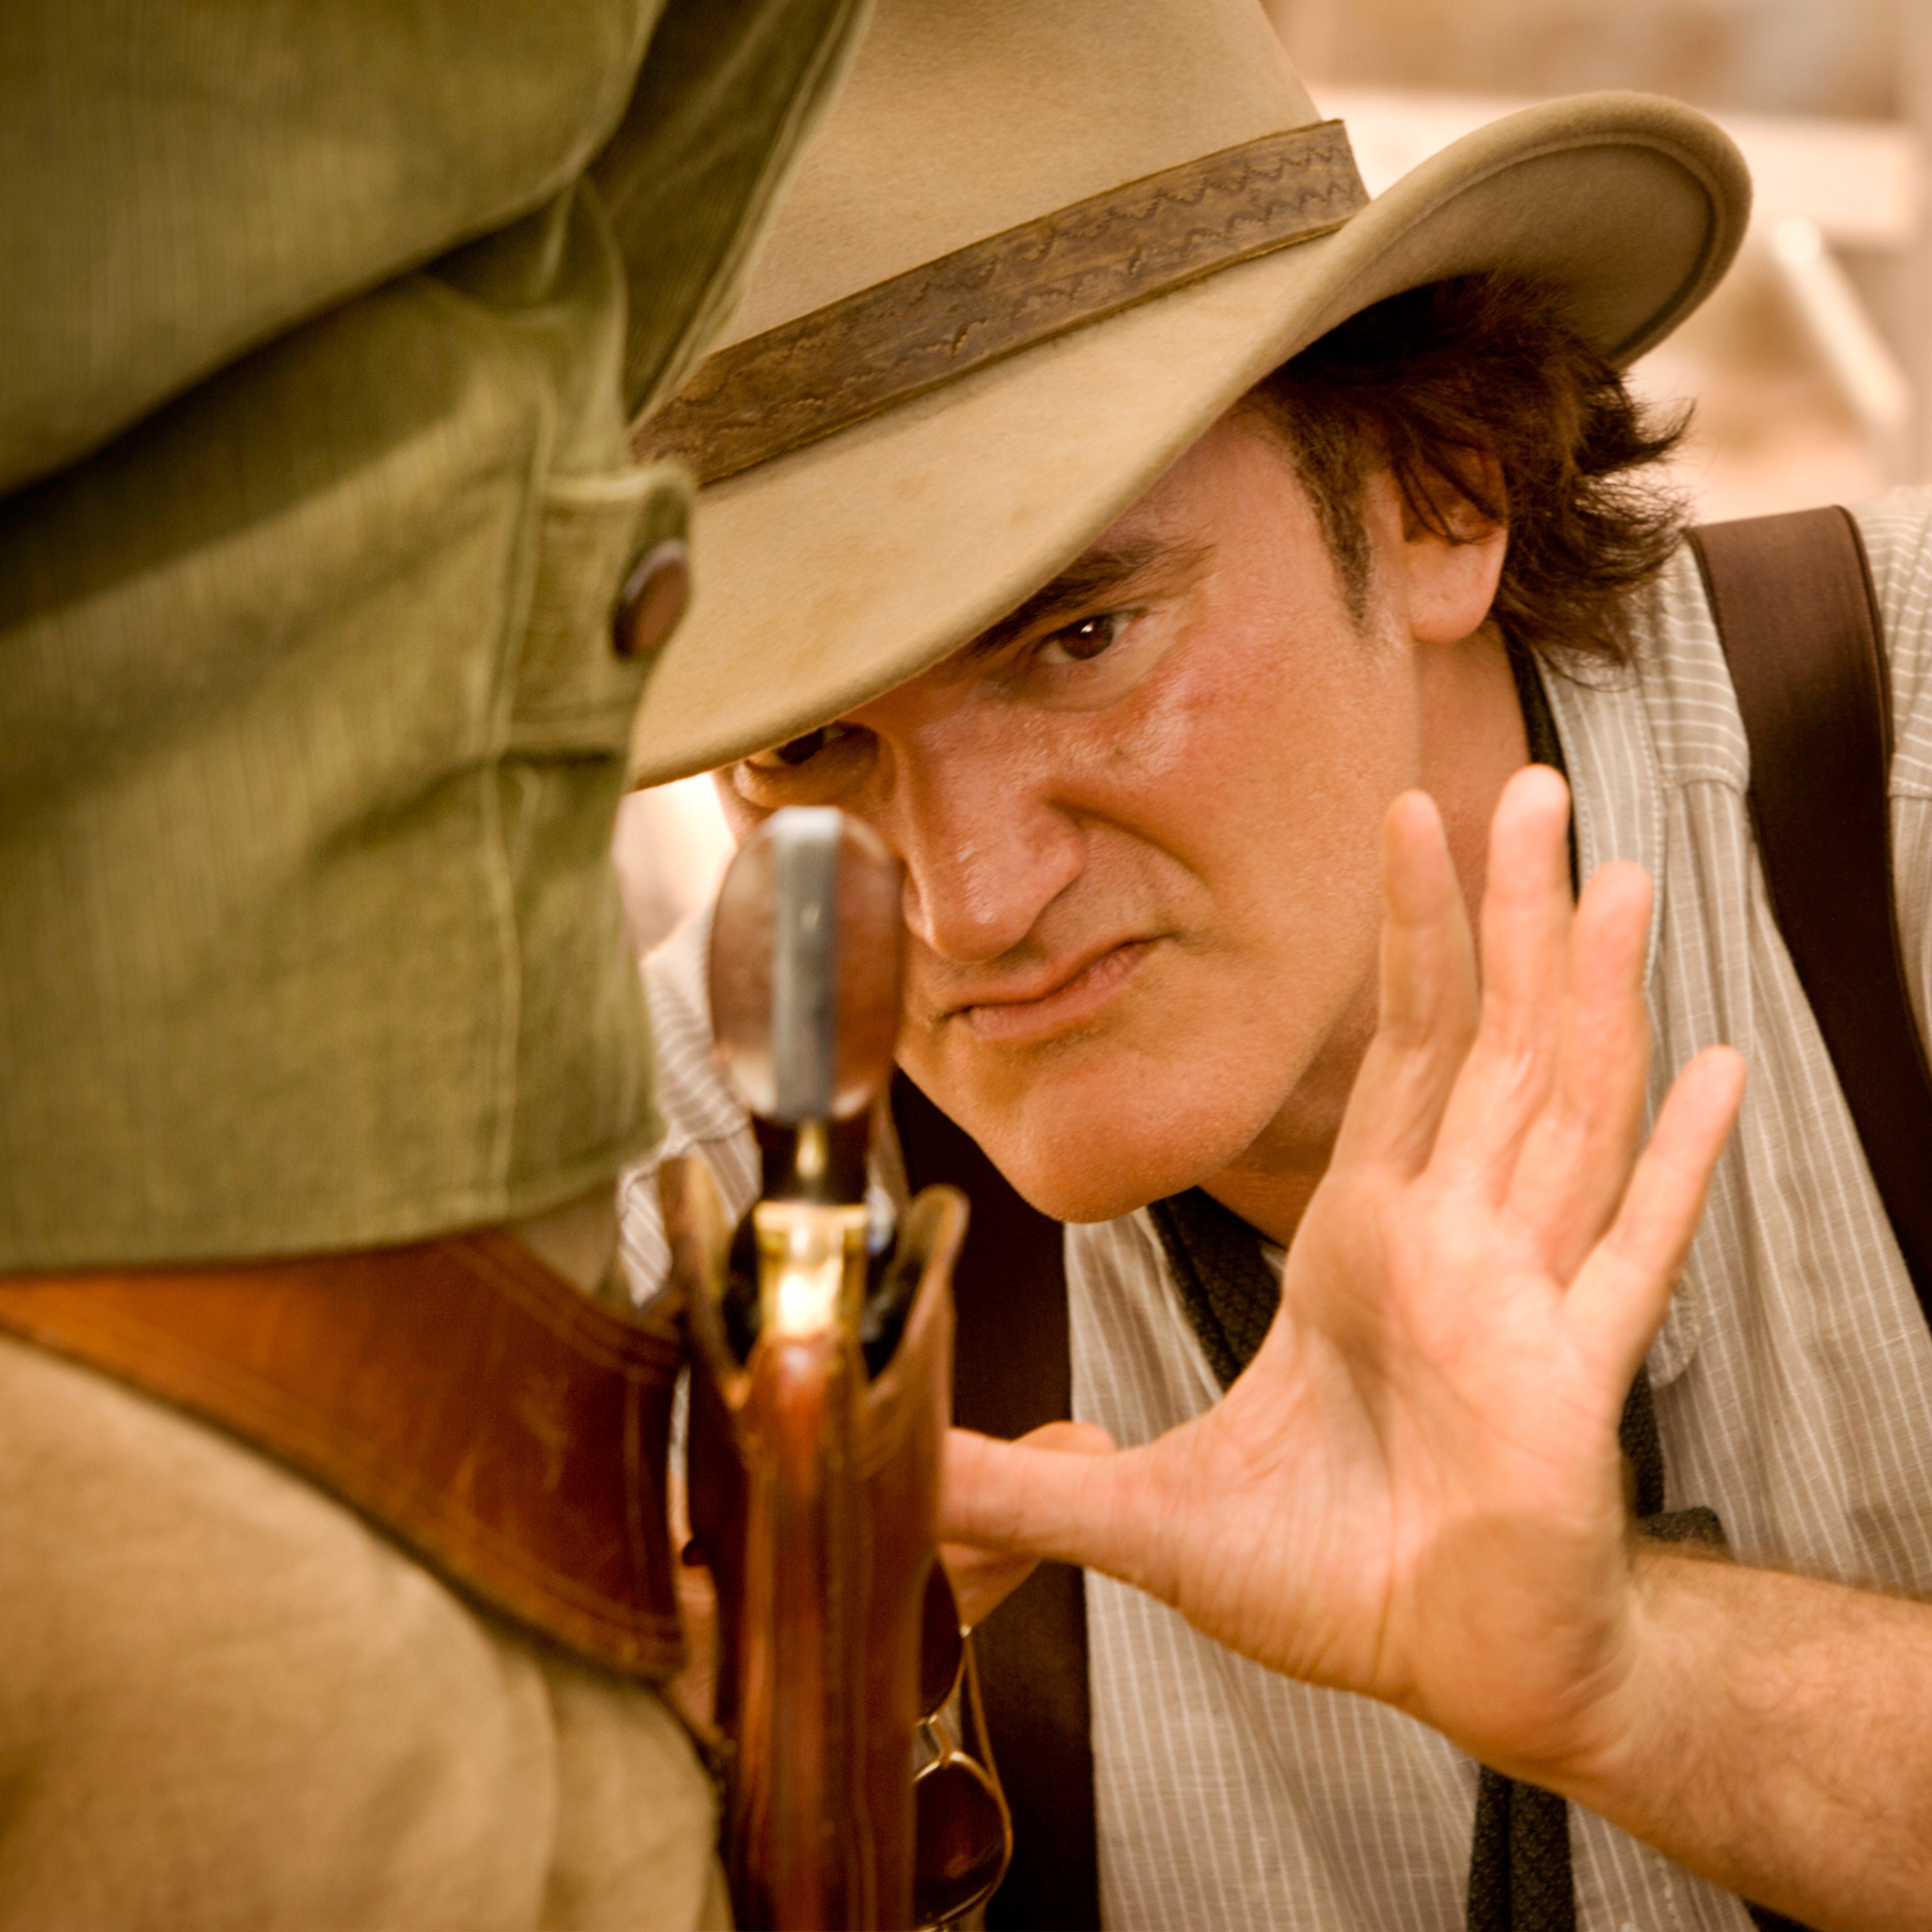 A close up of Quentin Tarantino as he leans in closely to examine a gun on someone&#x27;s belt